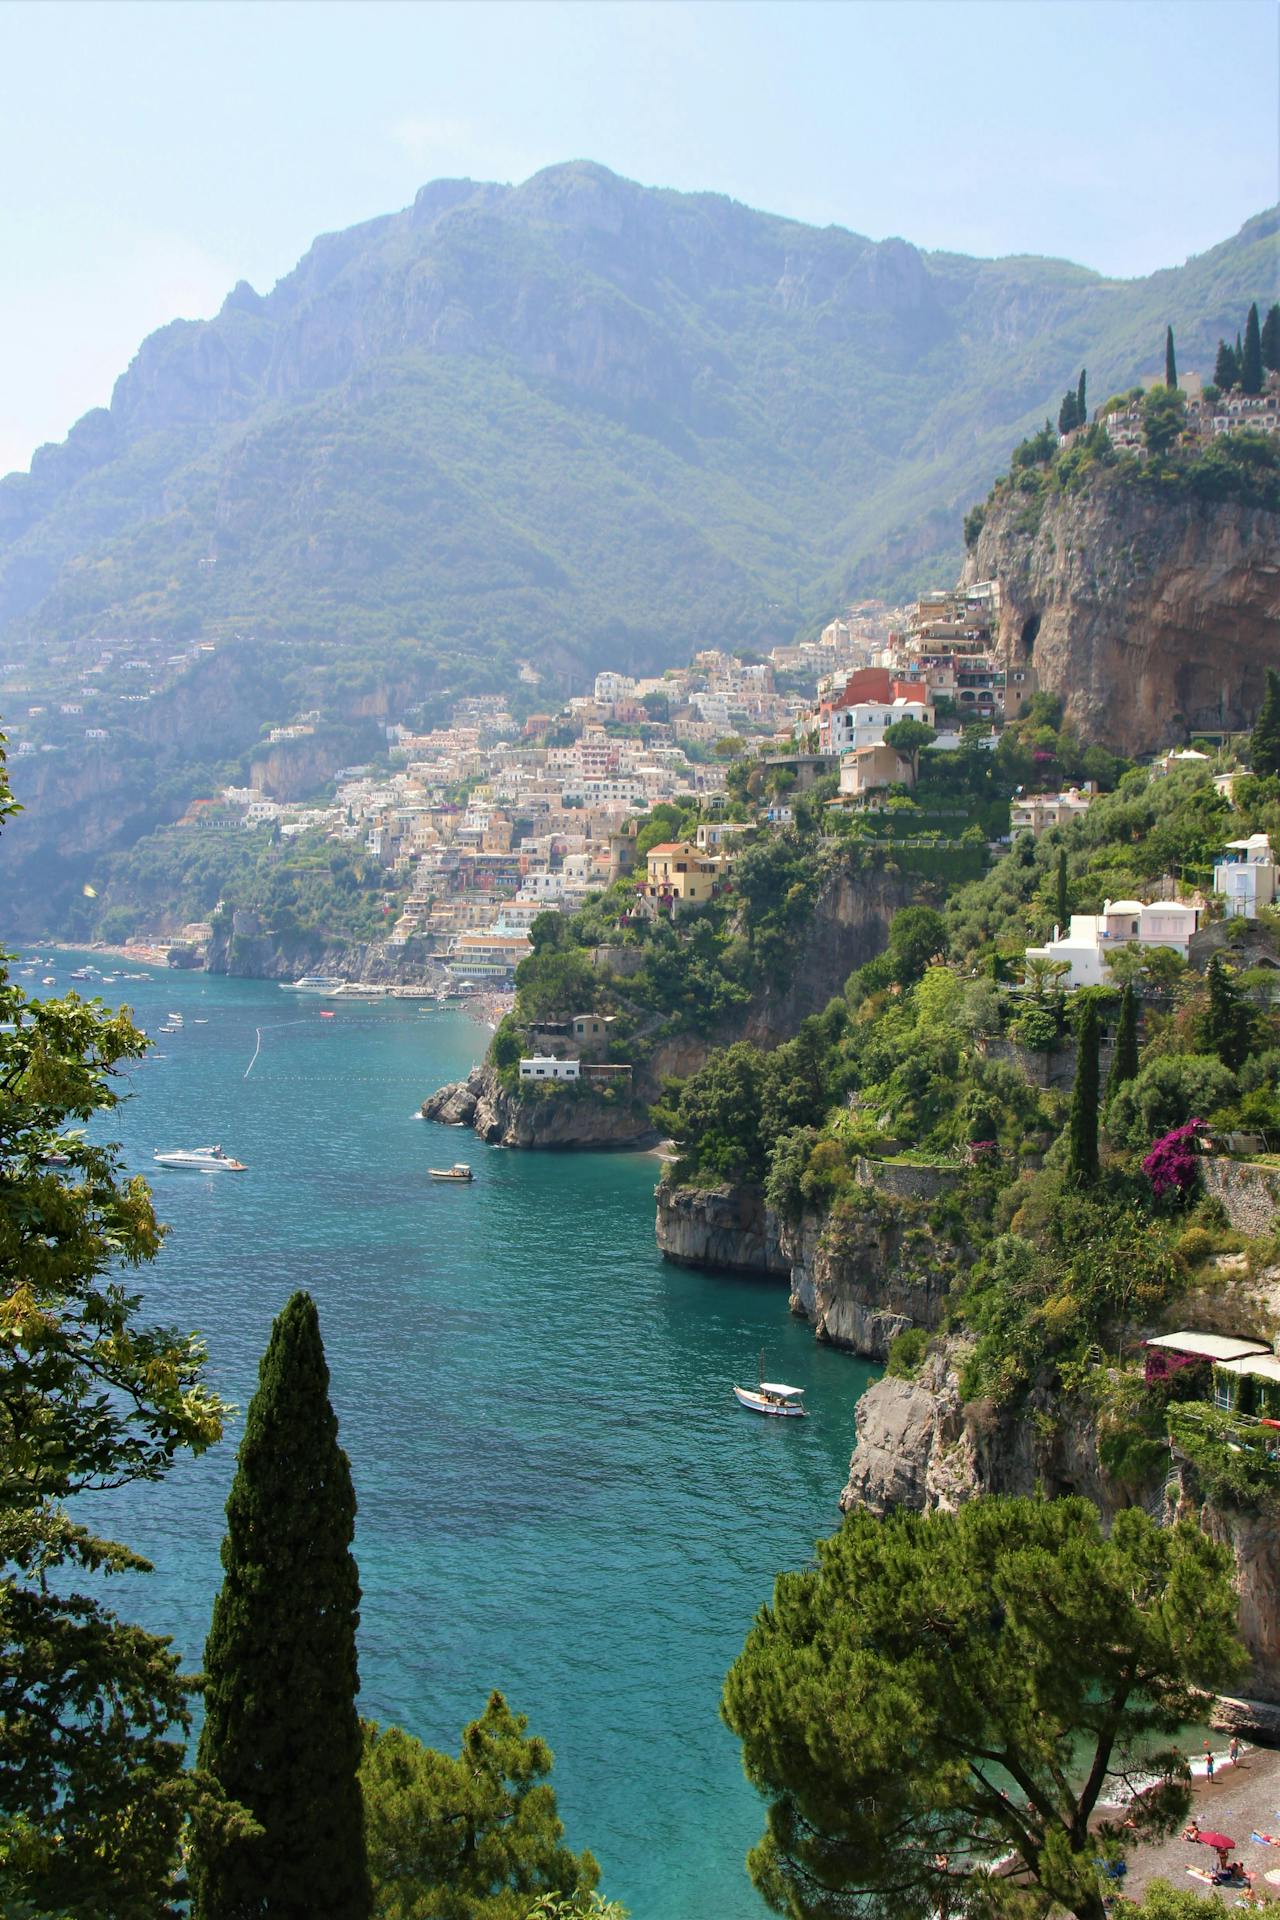 View of the water and mountains in Positano, Italy